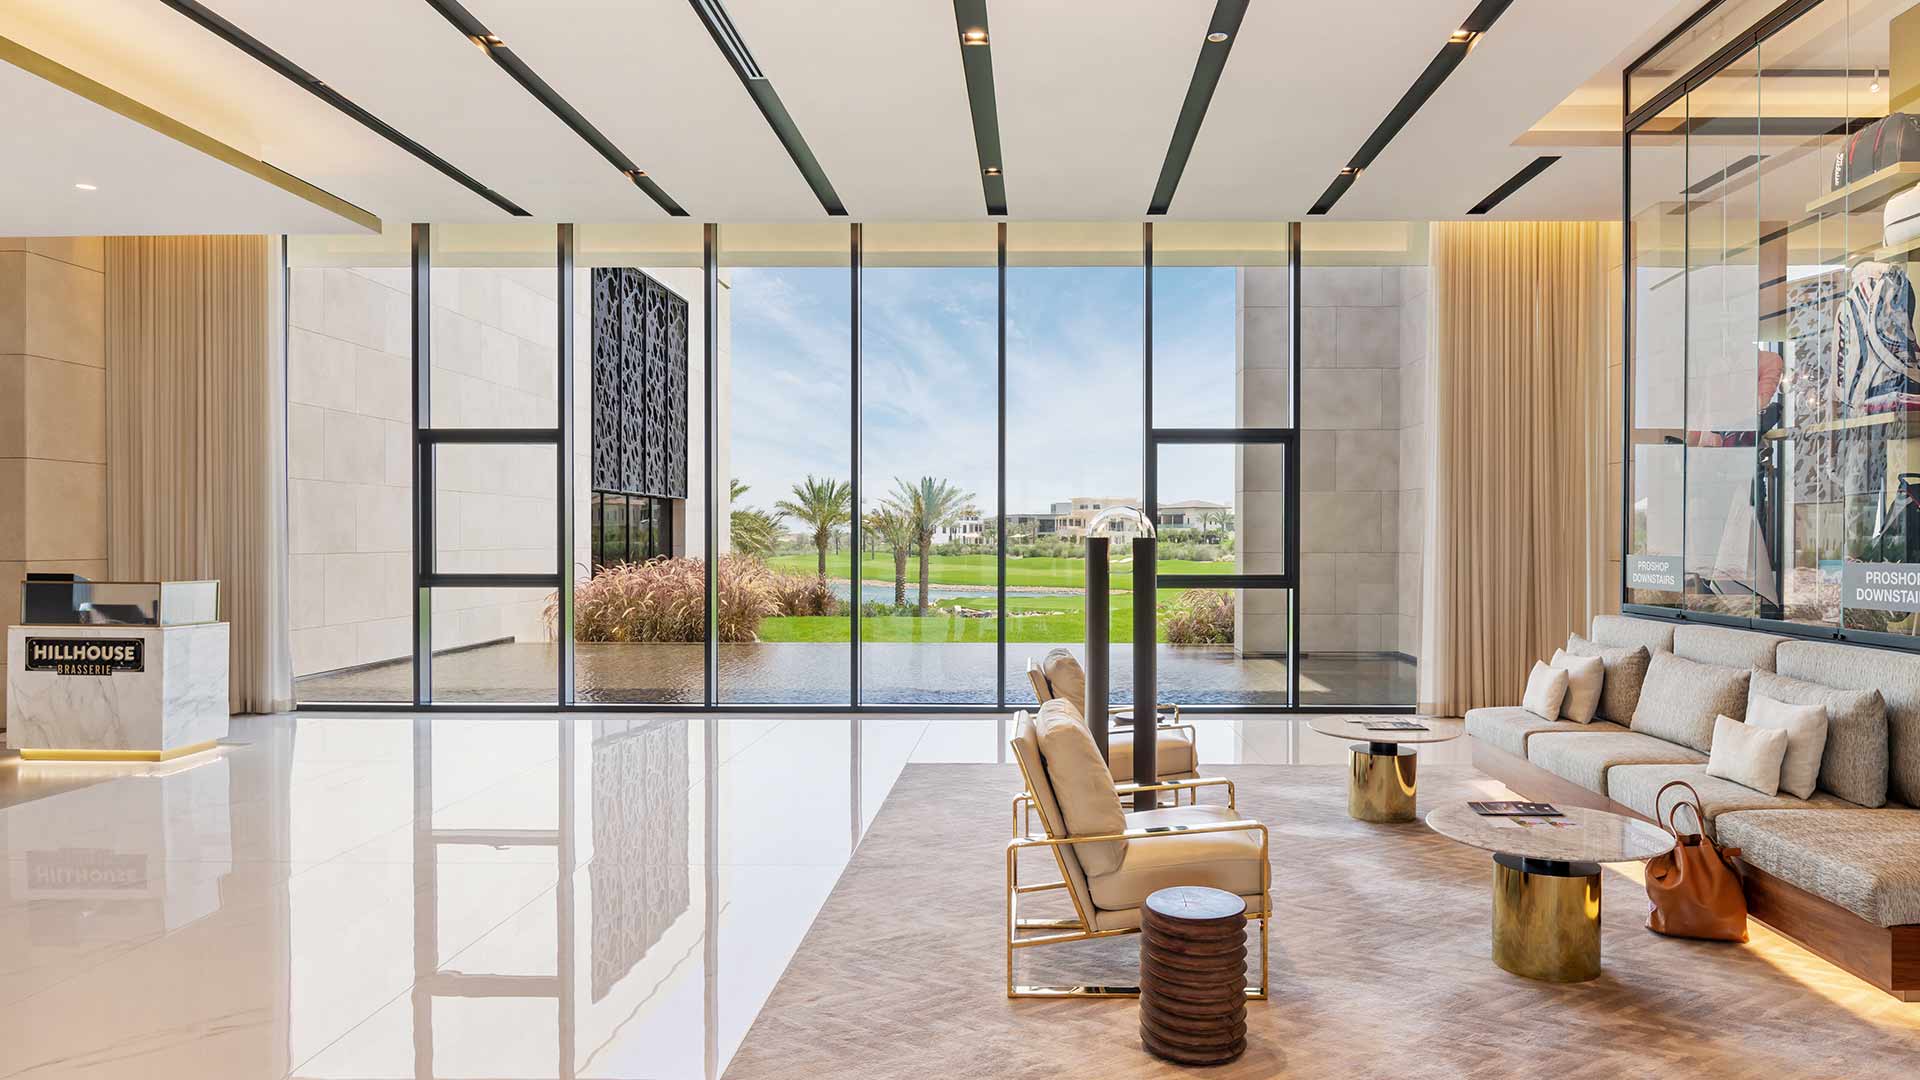 Architectural Lighting Design Modern Sleek Reception Space Seating Glass Display Cabinets Integrated Light Dubai Hills Golf Club Nulty